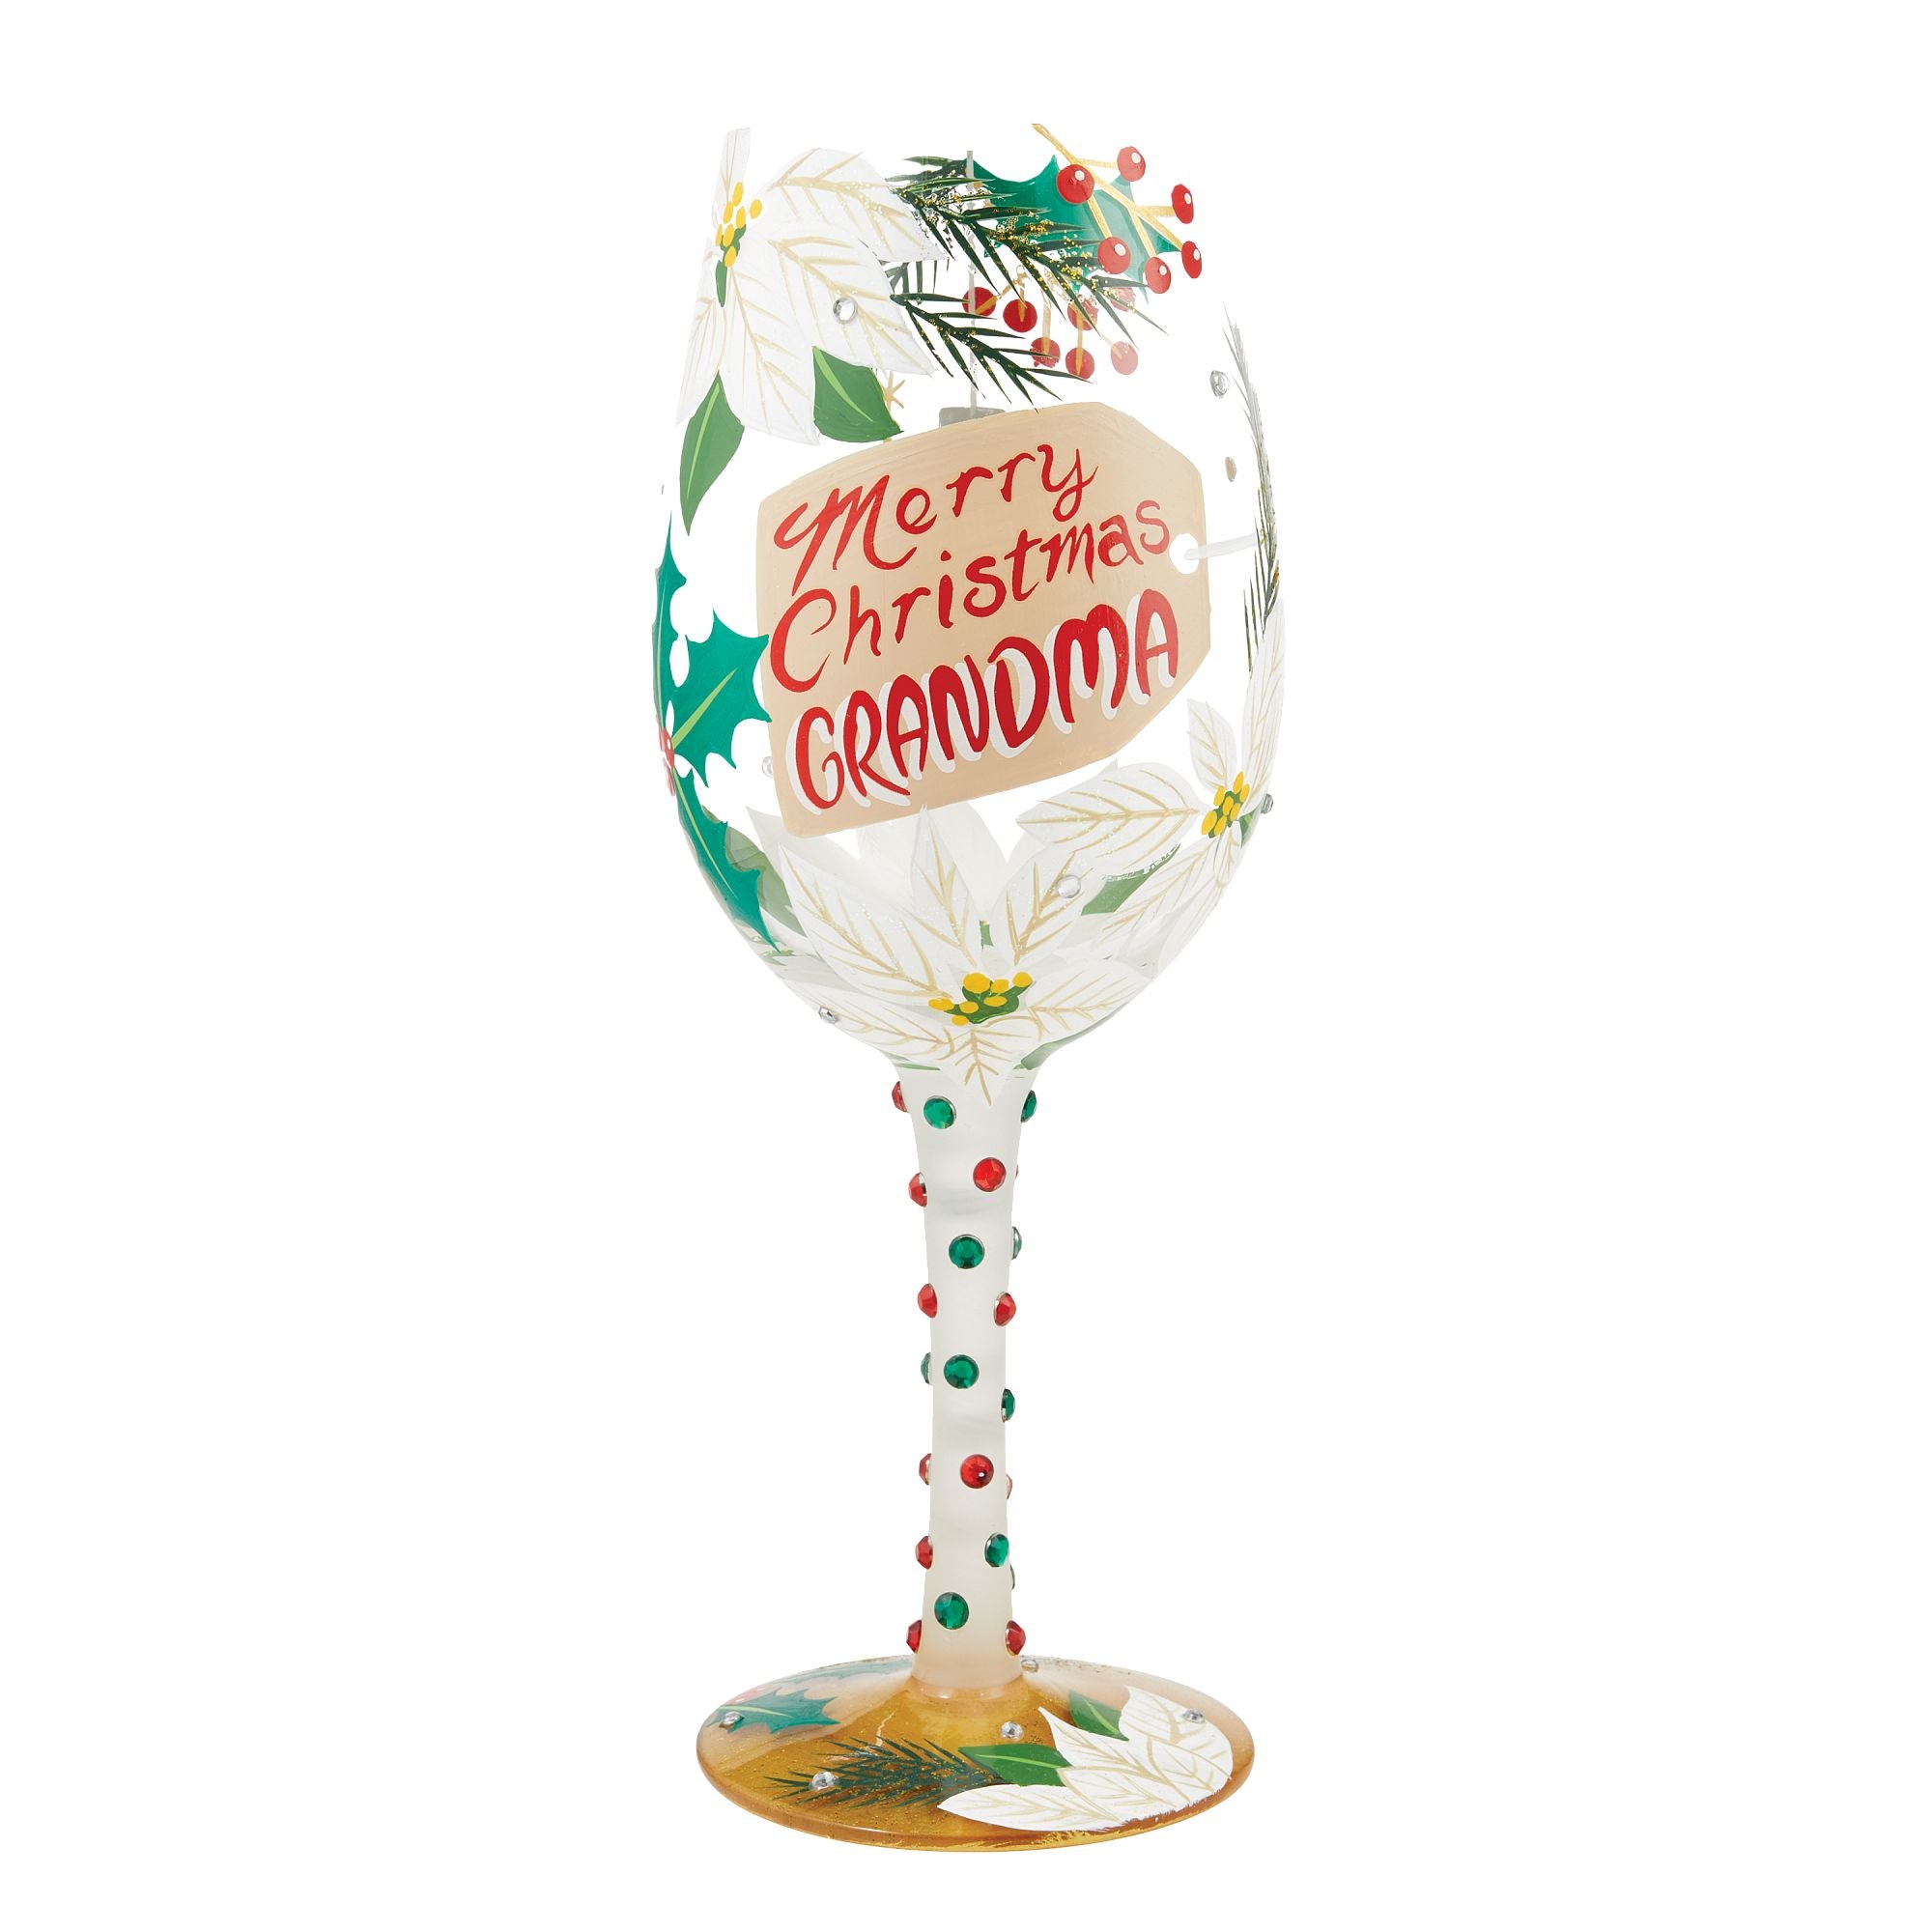 Humor Us Home Goods The Answer is Always Prosecco Wine Glass